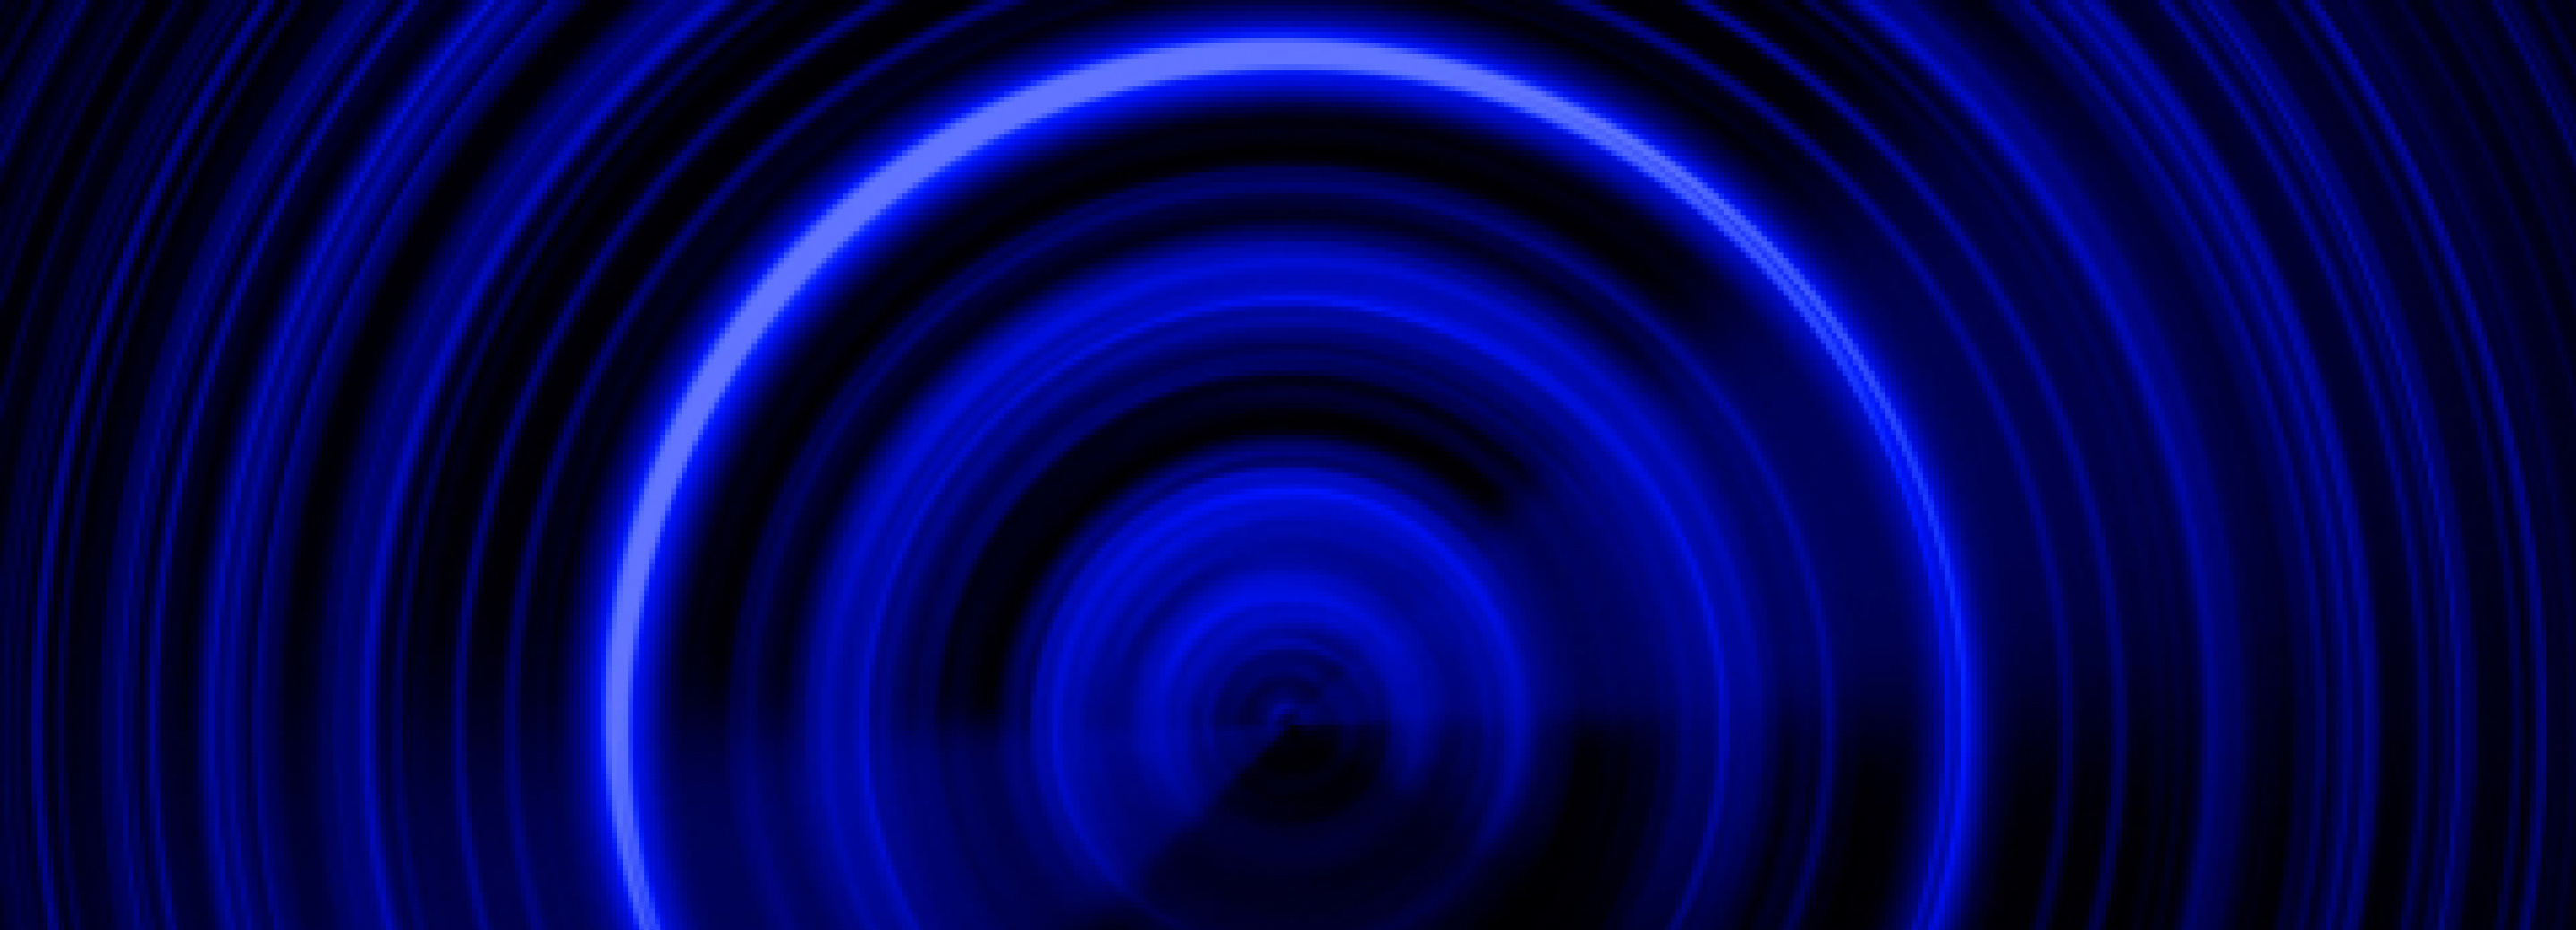 Abstract and circular neon blue light pattern over a dark background